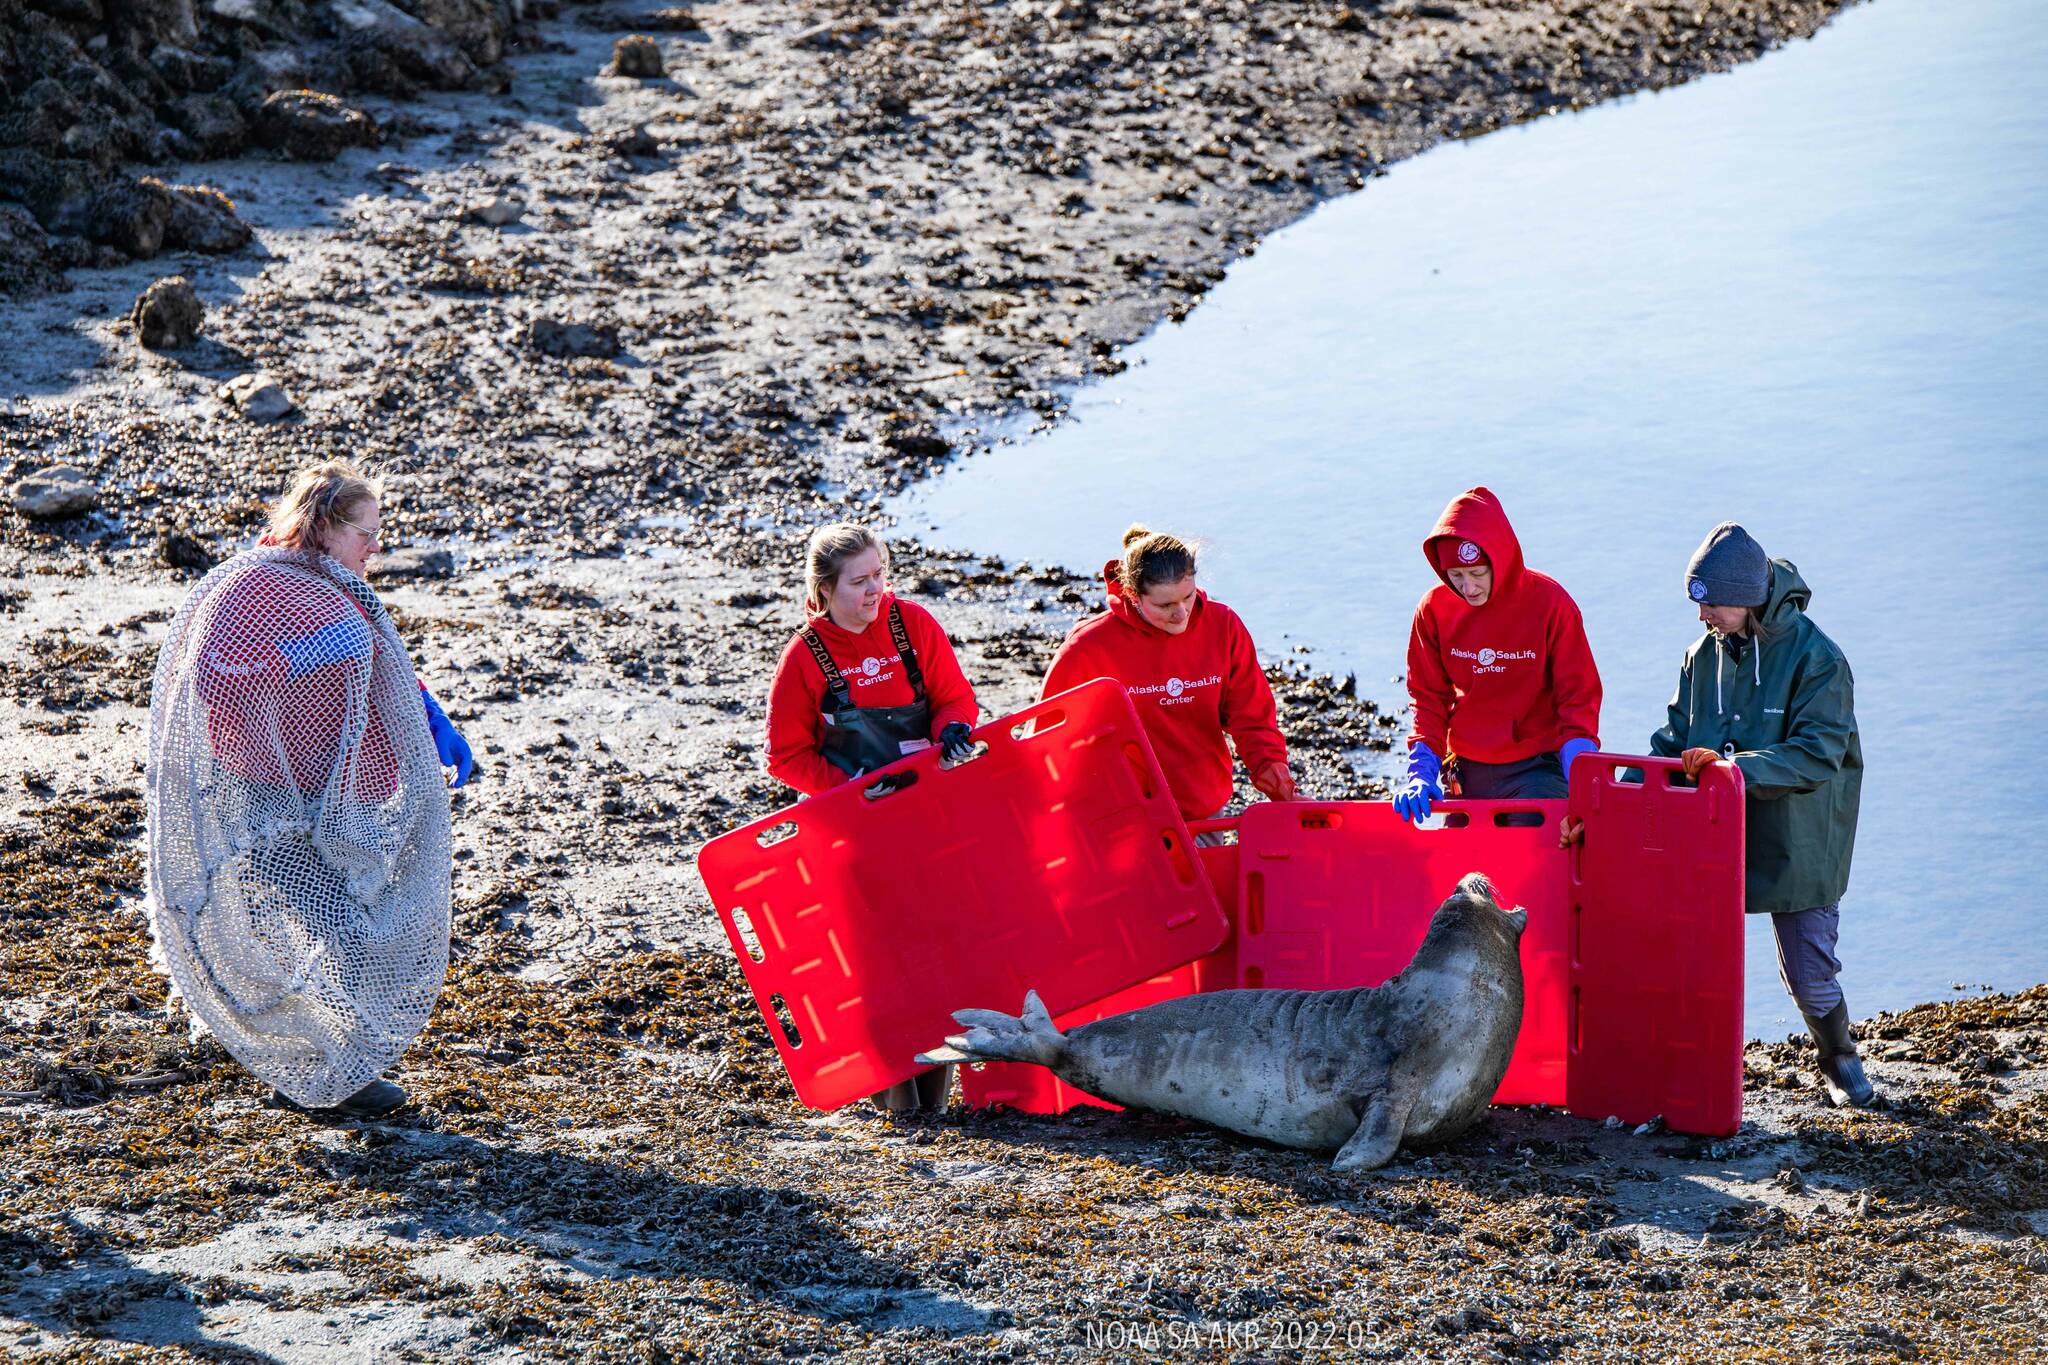 The Alaska SeaLife Center Wildlife Response Team prepares to transport a female elephant seal to the Alaska SeaLife Center on March 21, 2022 after receiving approval from the National Oceanic and Atmospheric Administration. The seal appeared bloated and unusually lethargic. (Kaiti Grant/Alaska SeaLife Center)